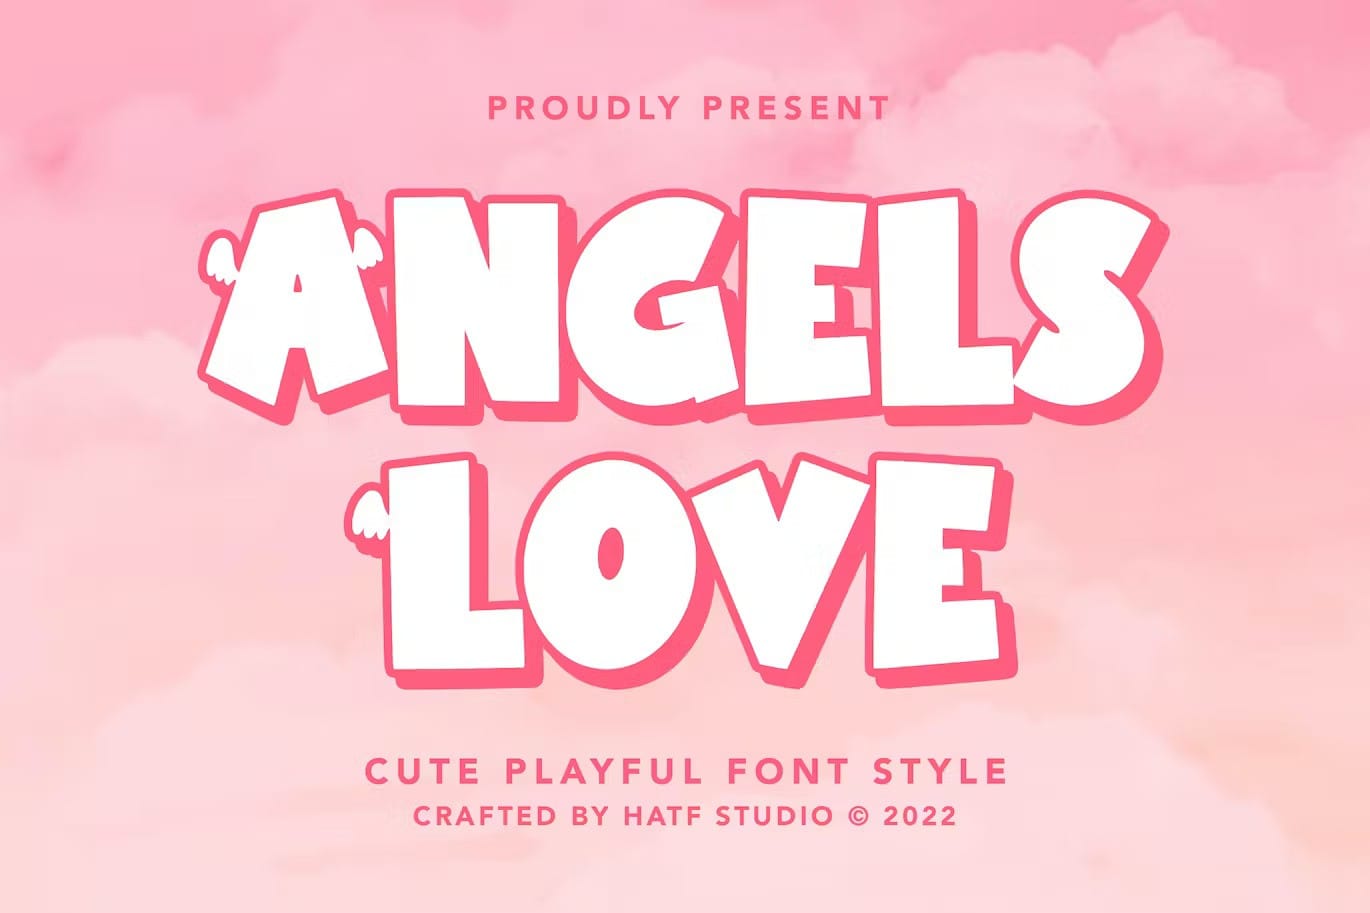 A cute playful font style